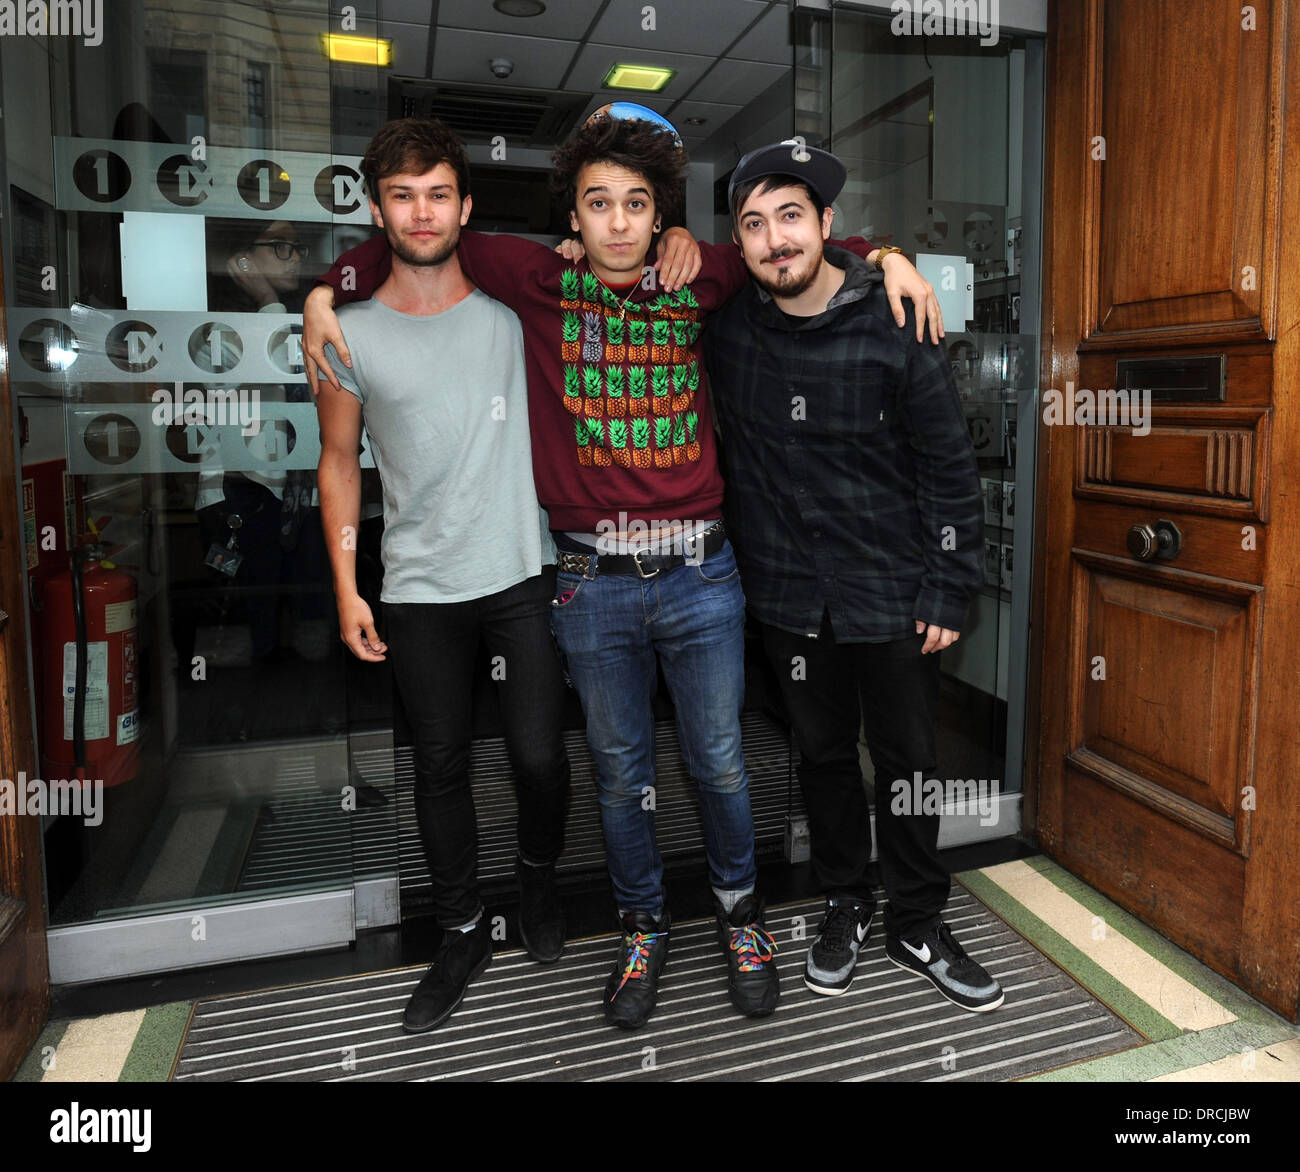 Ashley Horne, Stefan Abingdon and Dru Wakely of The Midnight Beast at the BBC Radio 1 studios London, England - 18.07.12 Stock Photo